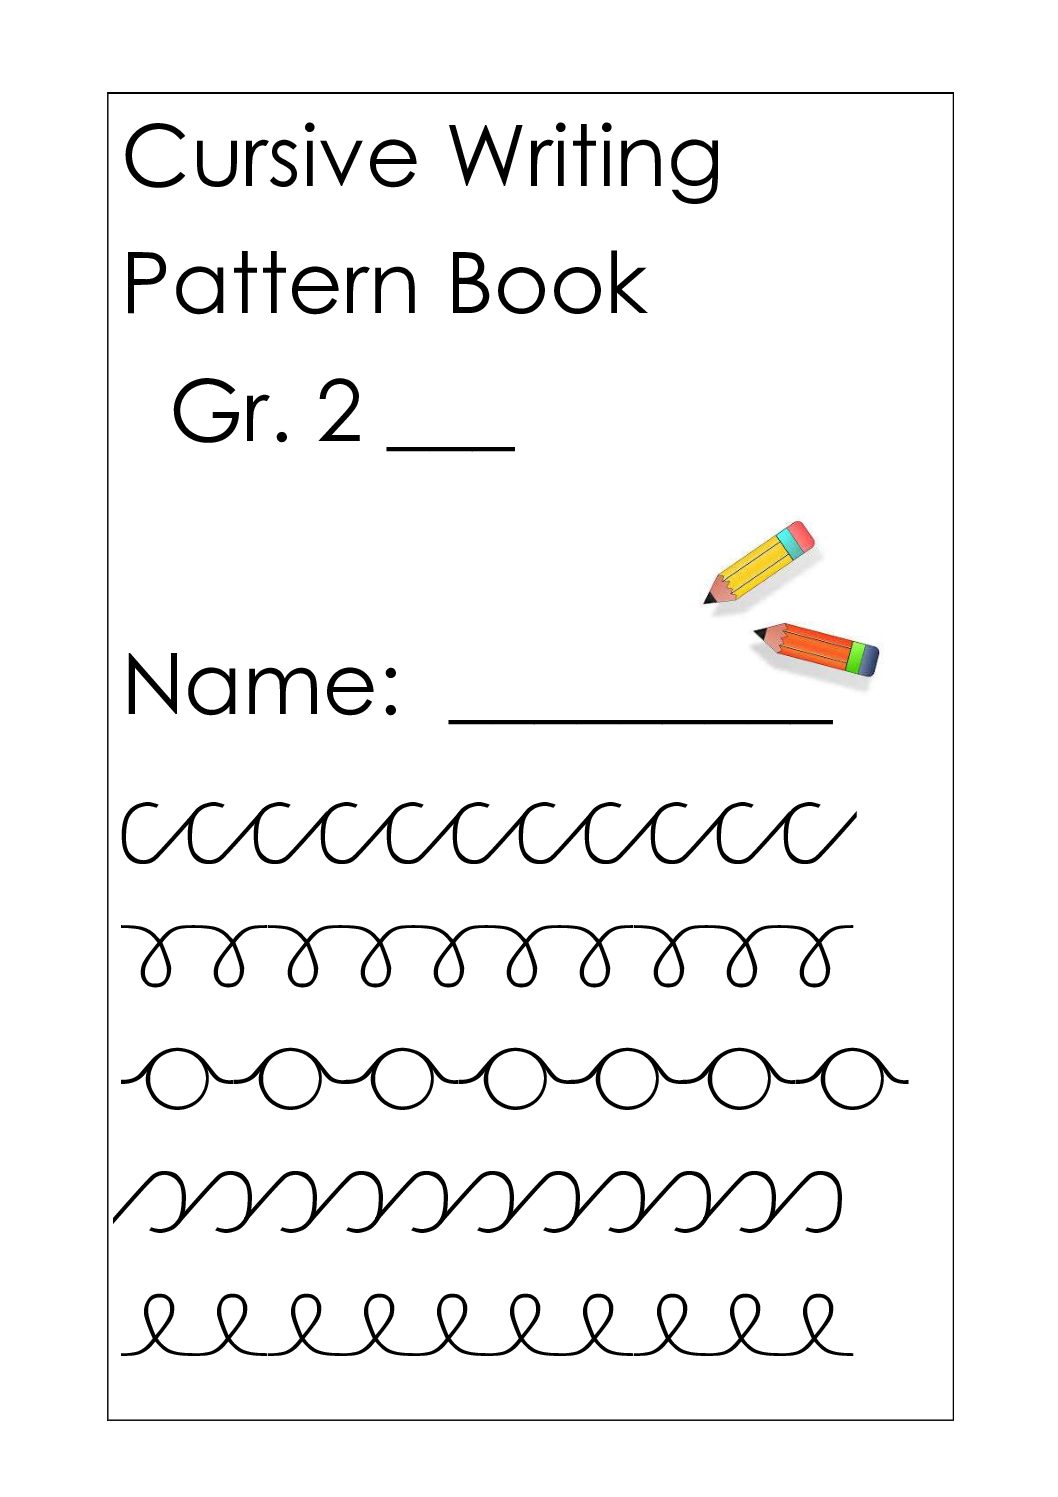 Cursive Writing Activities For 4th Grade